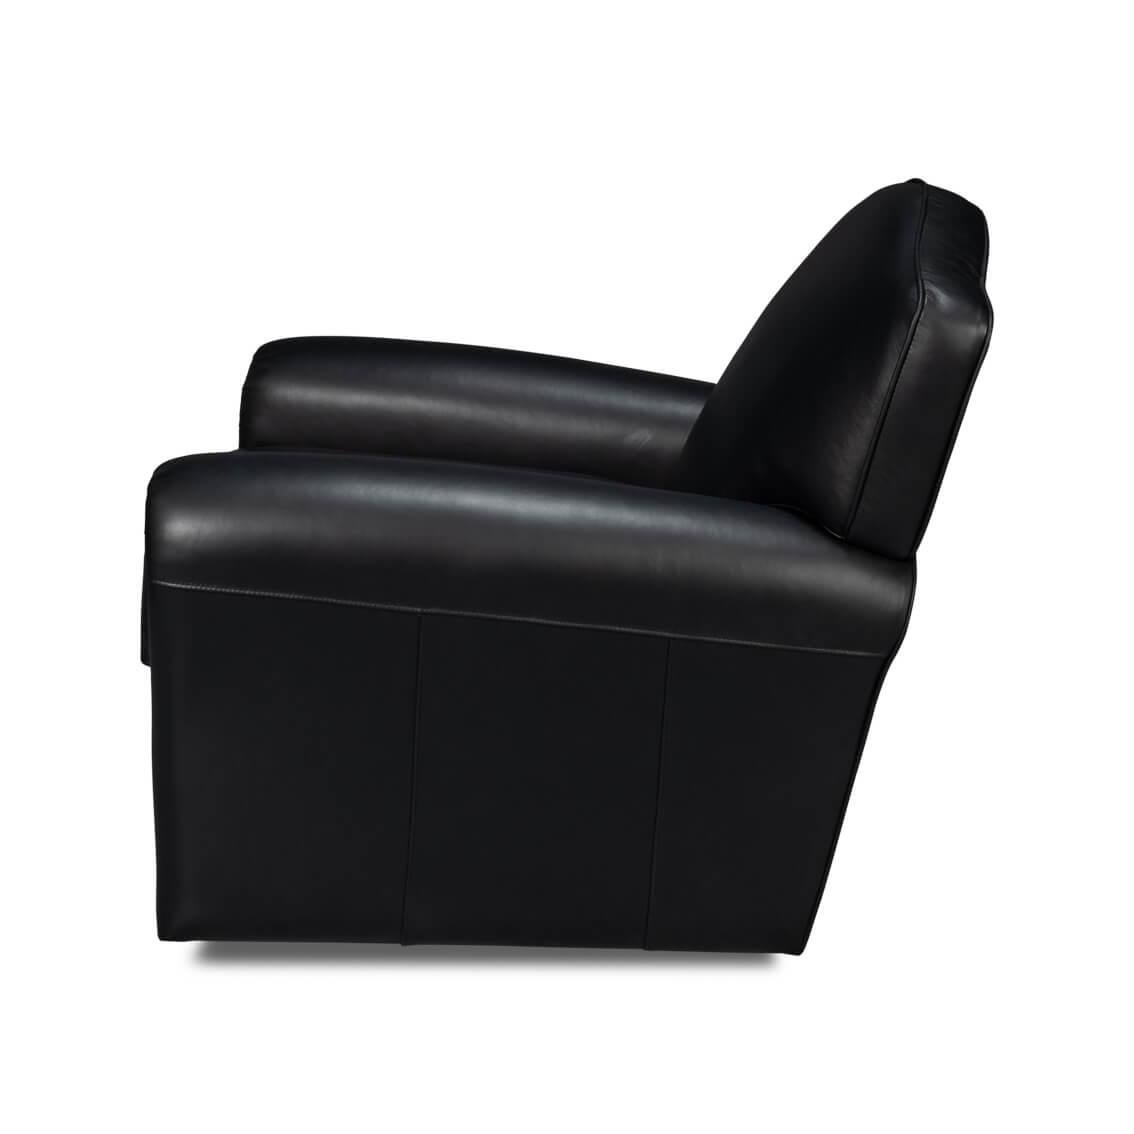 Asian French Art Deco Style Black Leather Club Chair For Sale